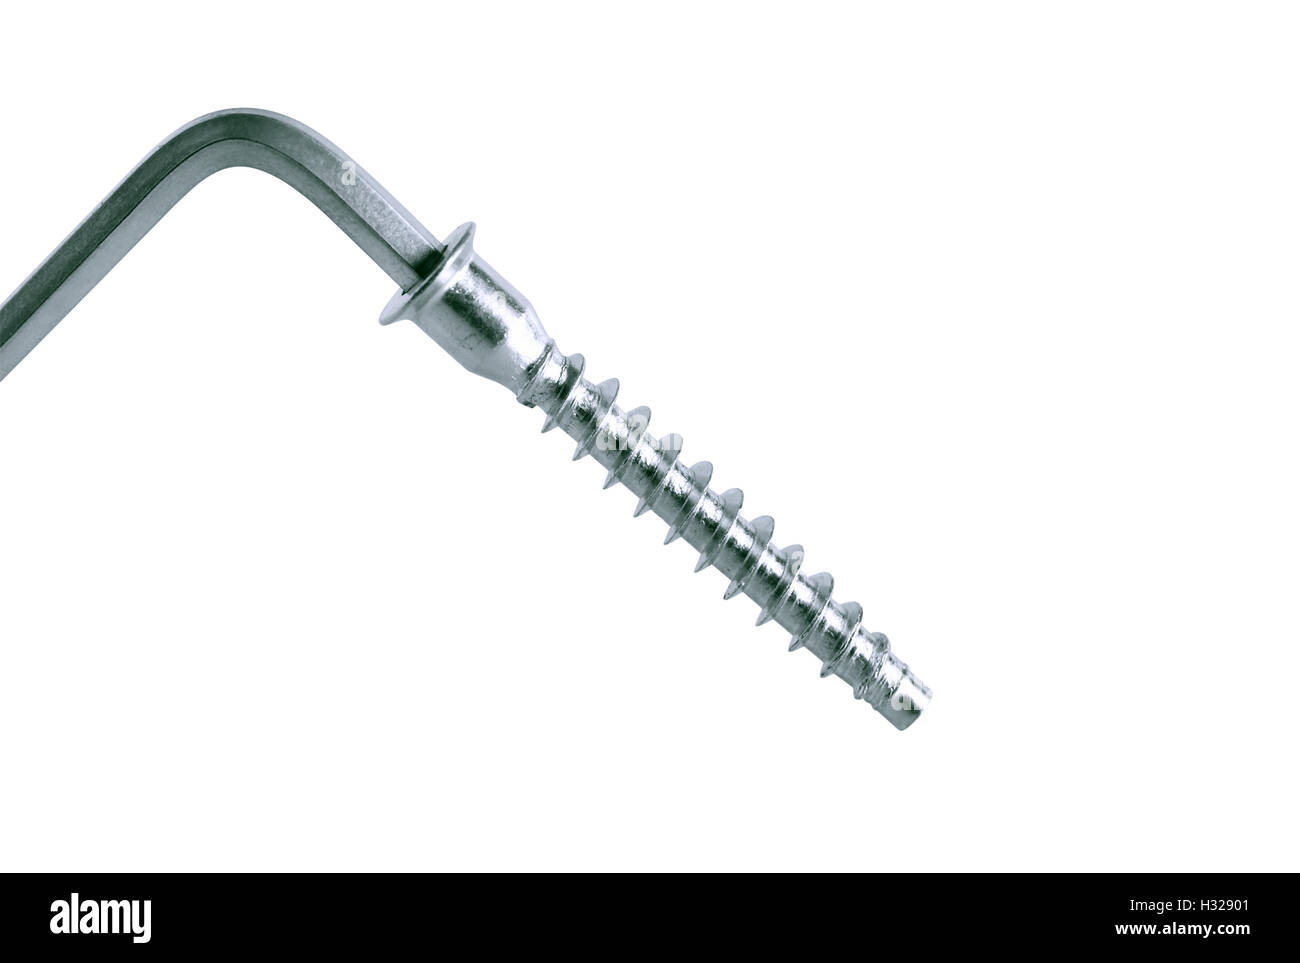 Screw And Wrench Stock Photo